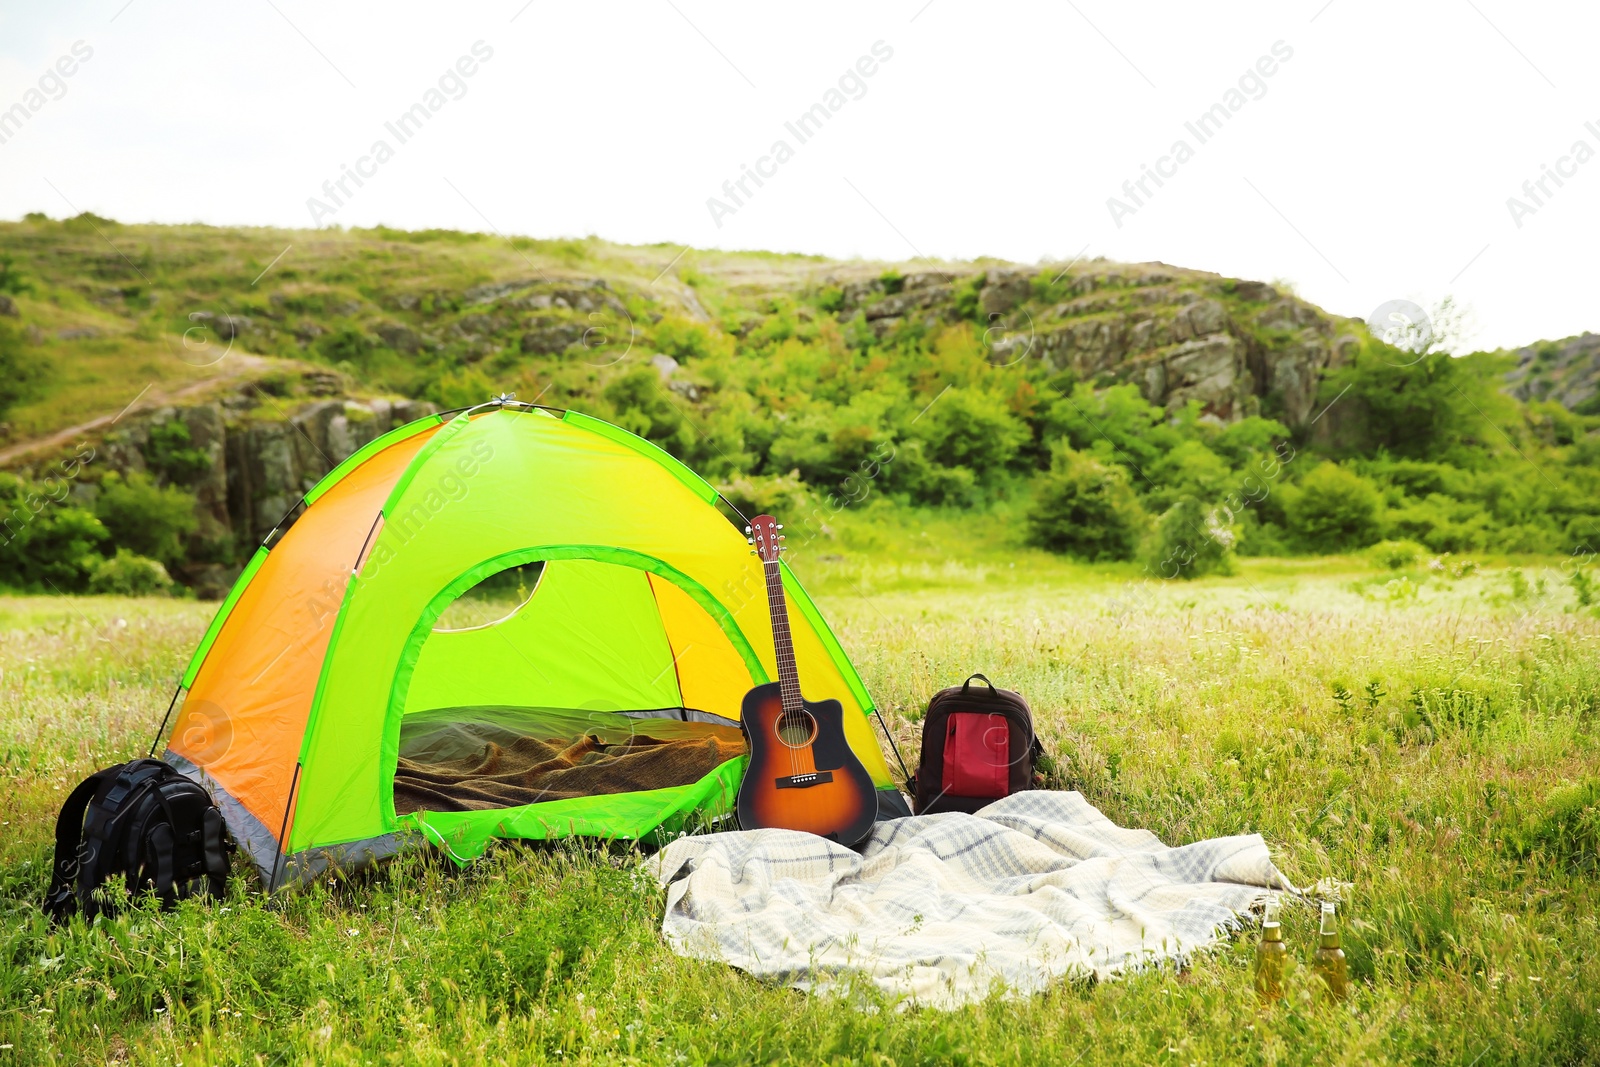 Photo of Camping tent, backpacks and guitar in wilderness